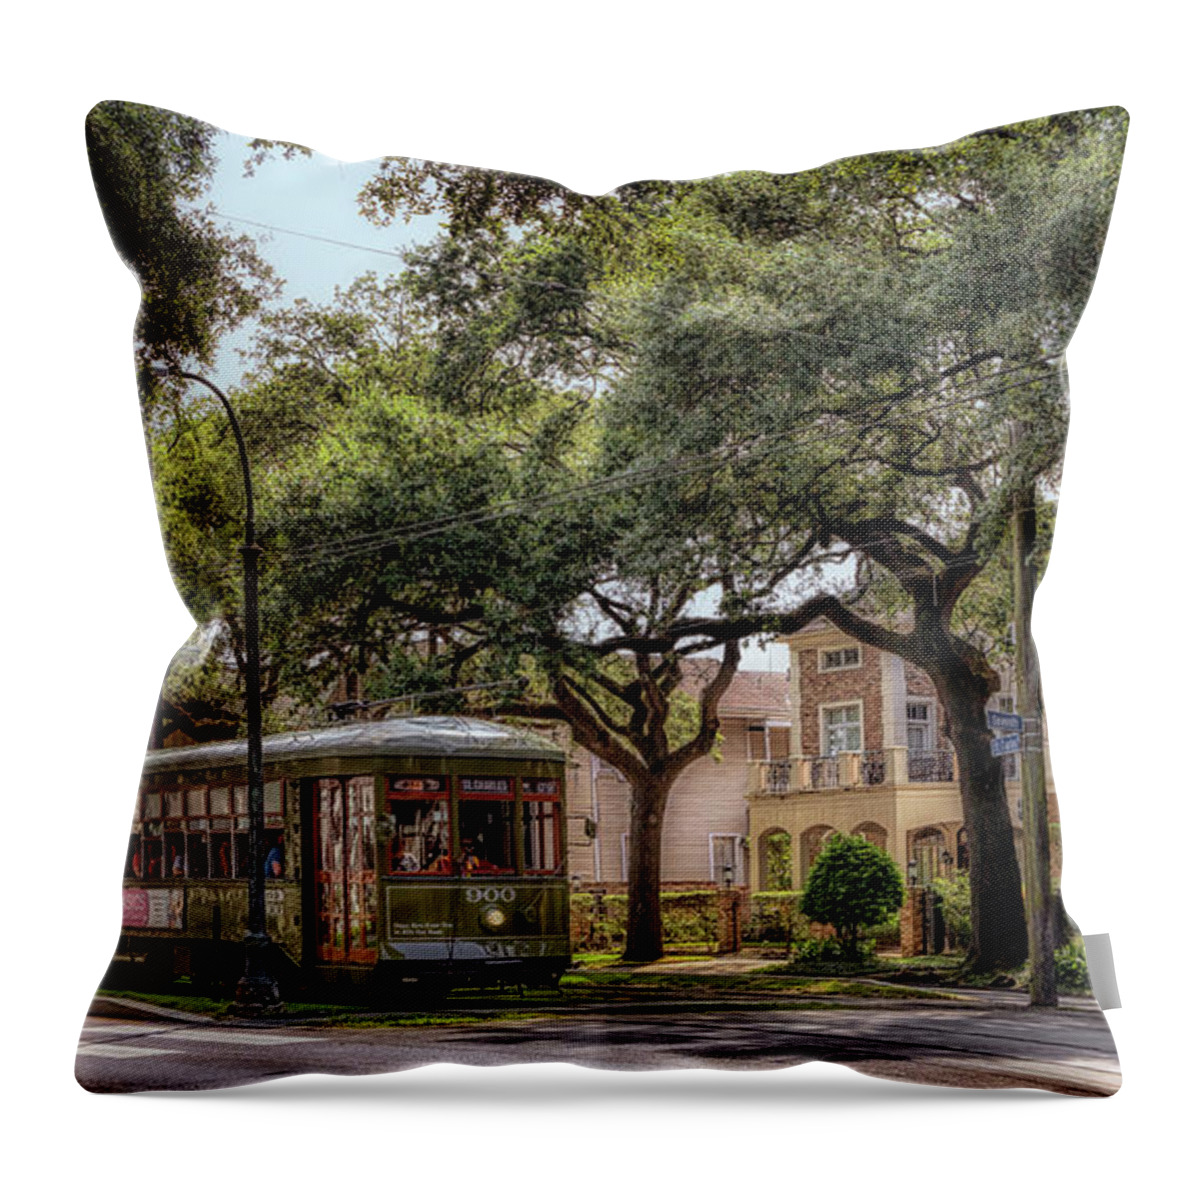 Garden District Throw Pillow featuring the photograph Historic St. Charles Streetcar by Susan Rissi Tregoning